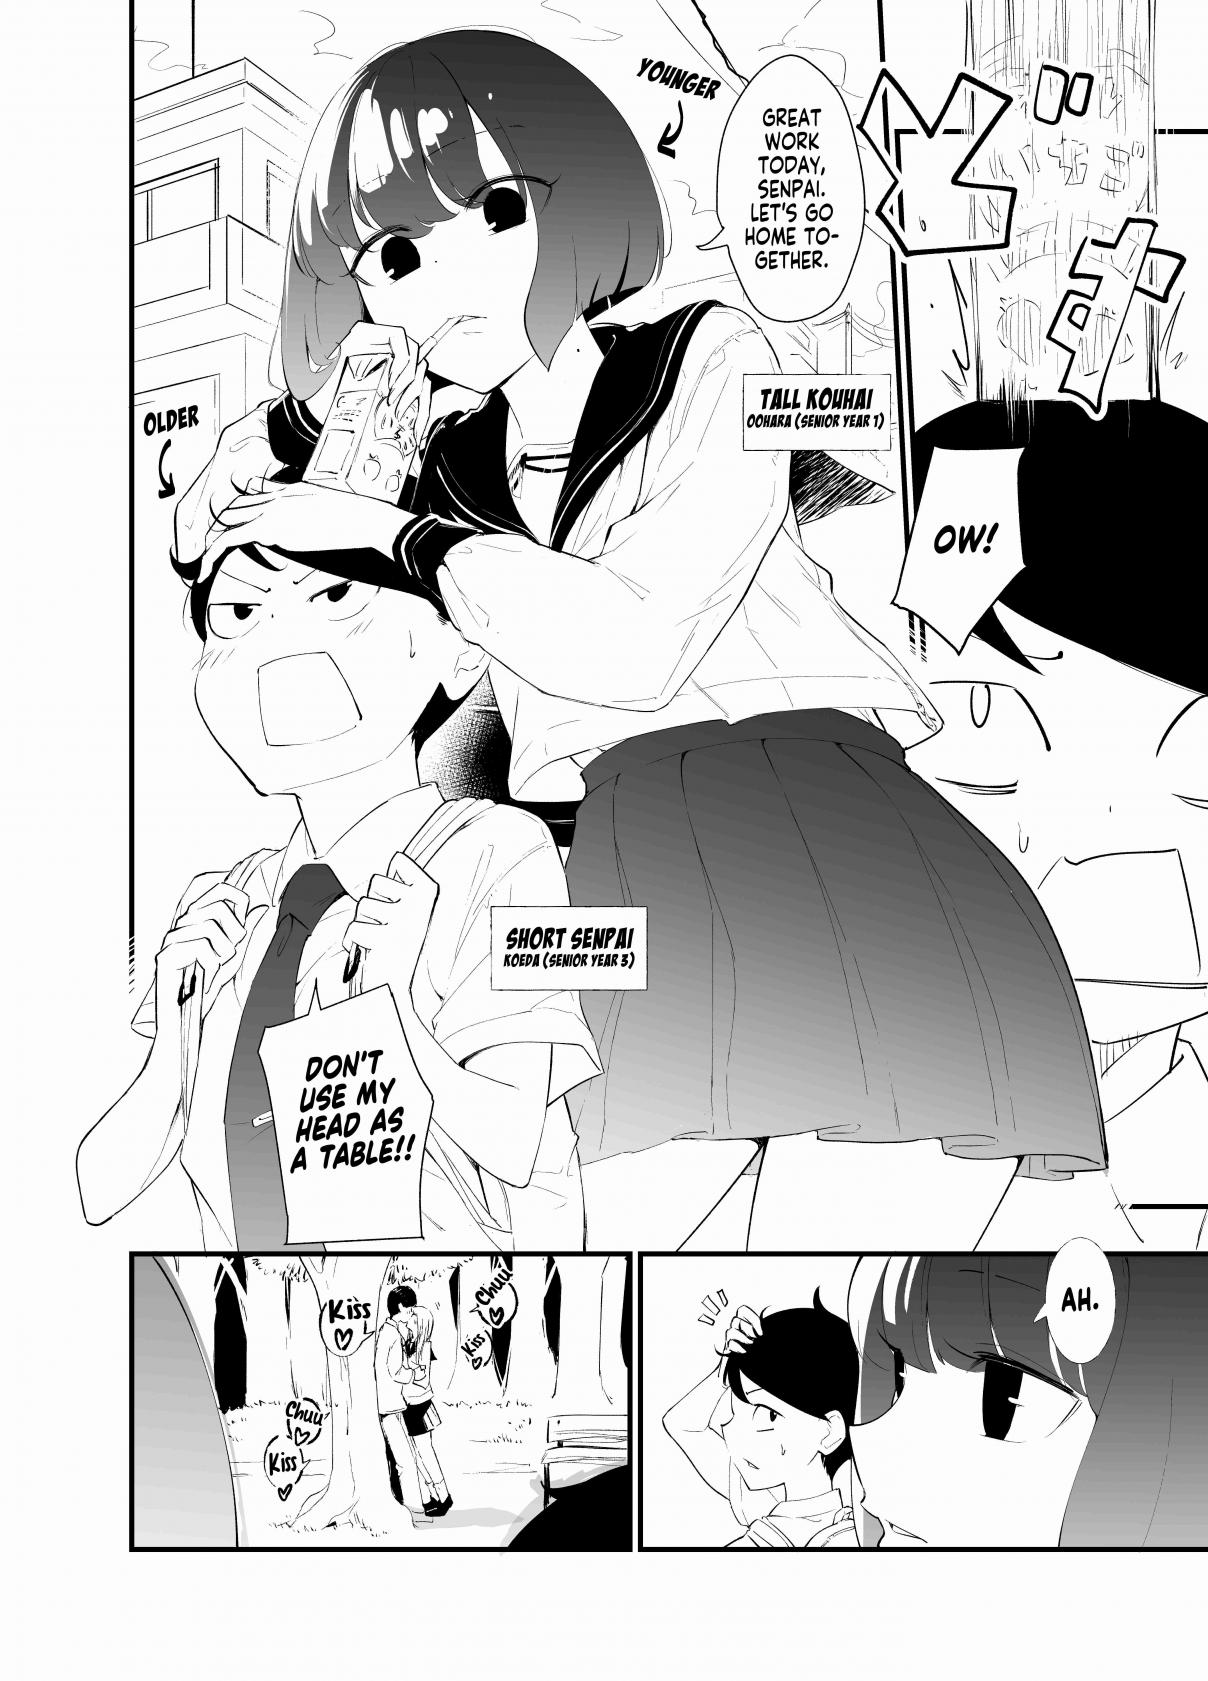 Until the Tall Kouhai (♀) and the Short Senpai (♂) Relationship Develops Into Romance Vol. 1 Ch. 3 The Right Way to Kiss Despite the Height Difference